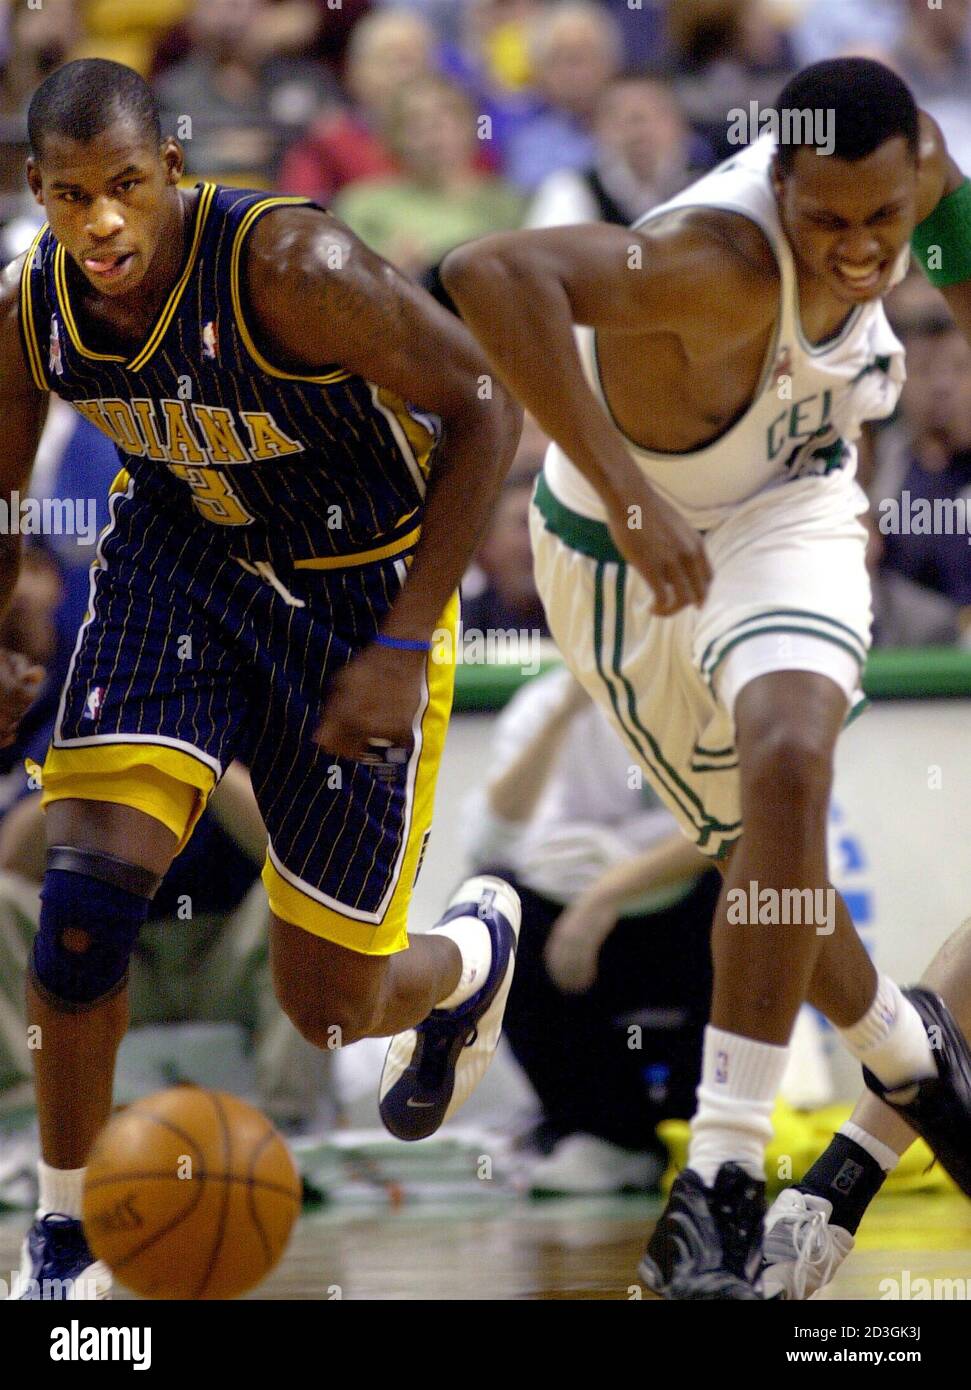 The Indiana Pacers Al Harrington (L) and the Boston Celtics Paul Pierce (L)  chase down a loose ball in first half NBA action in Boston, Massachusetts  November 14, 2001. REUTERS/Brian Snyder BS